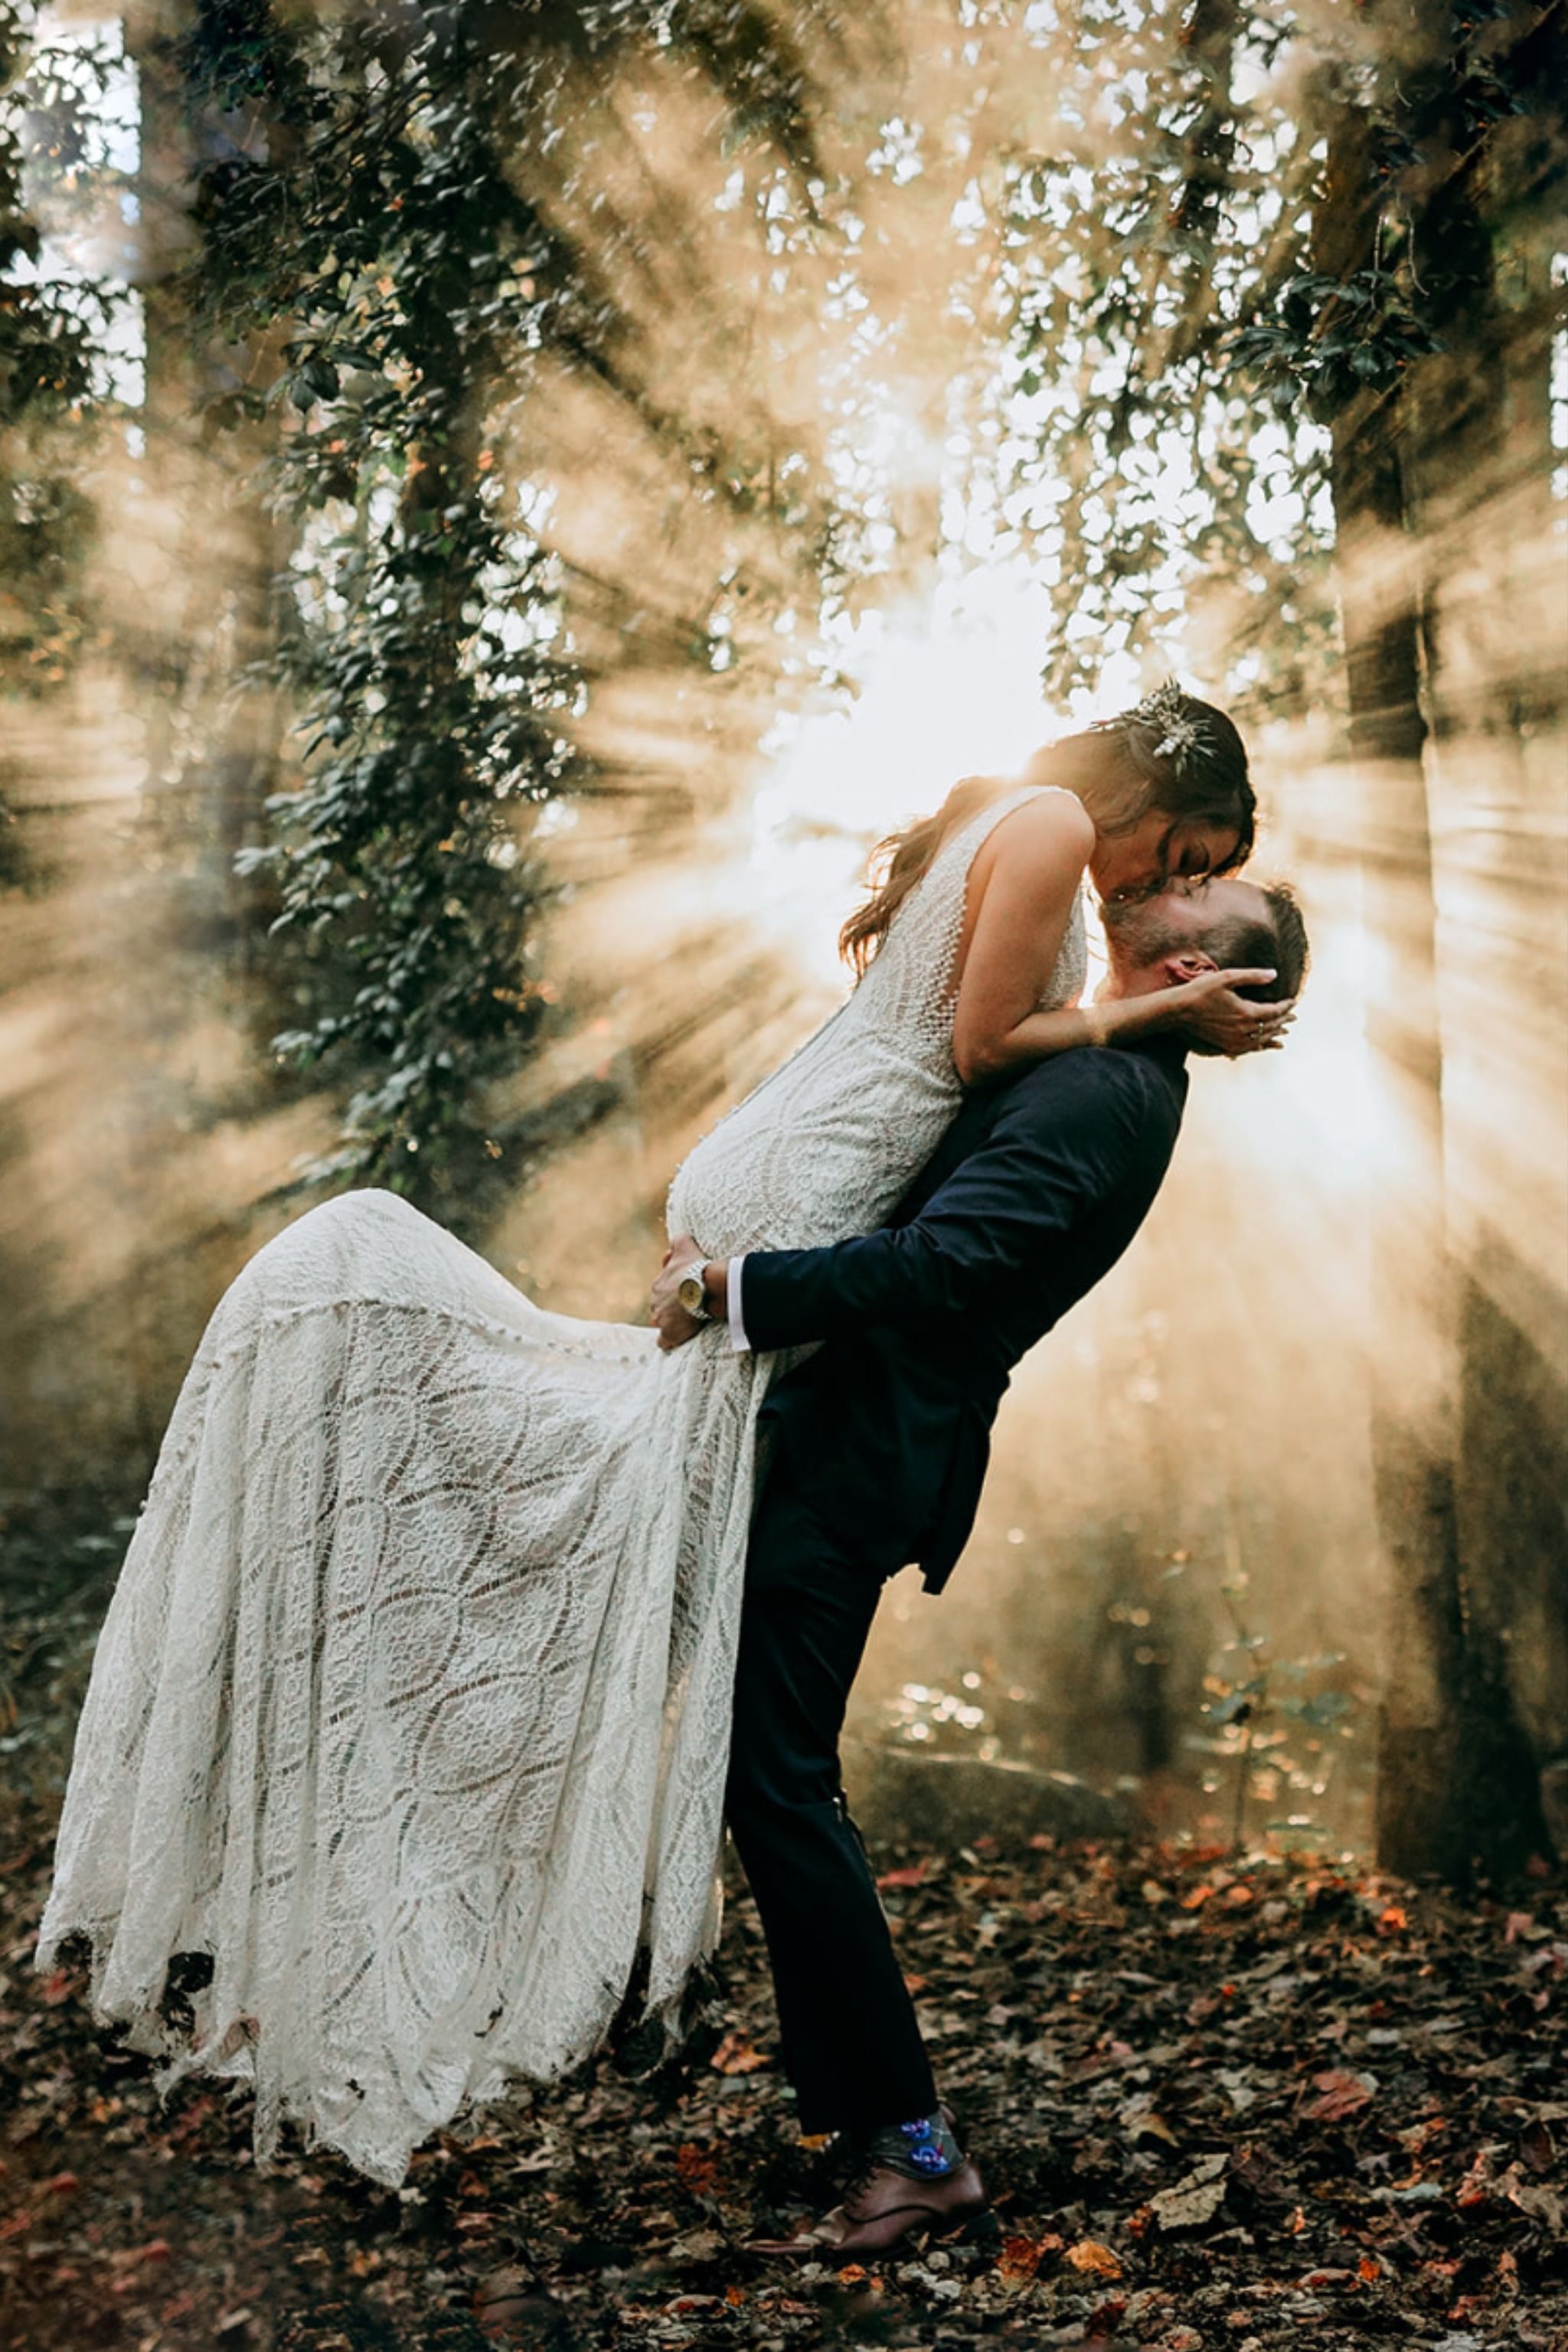 The 186 Most Kickass Wedding Images Ever